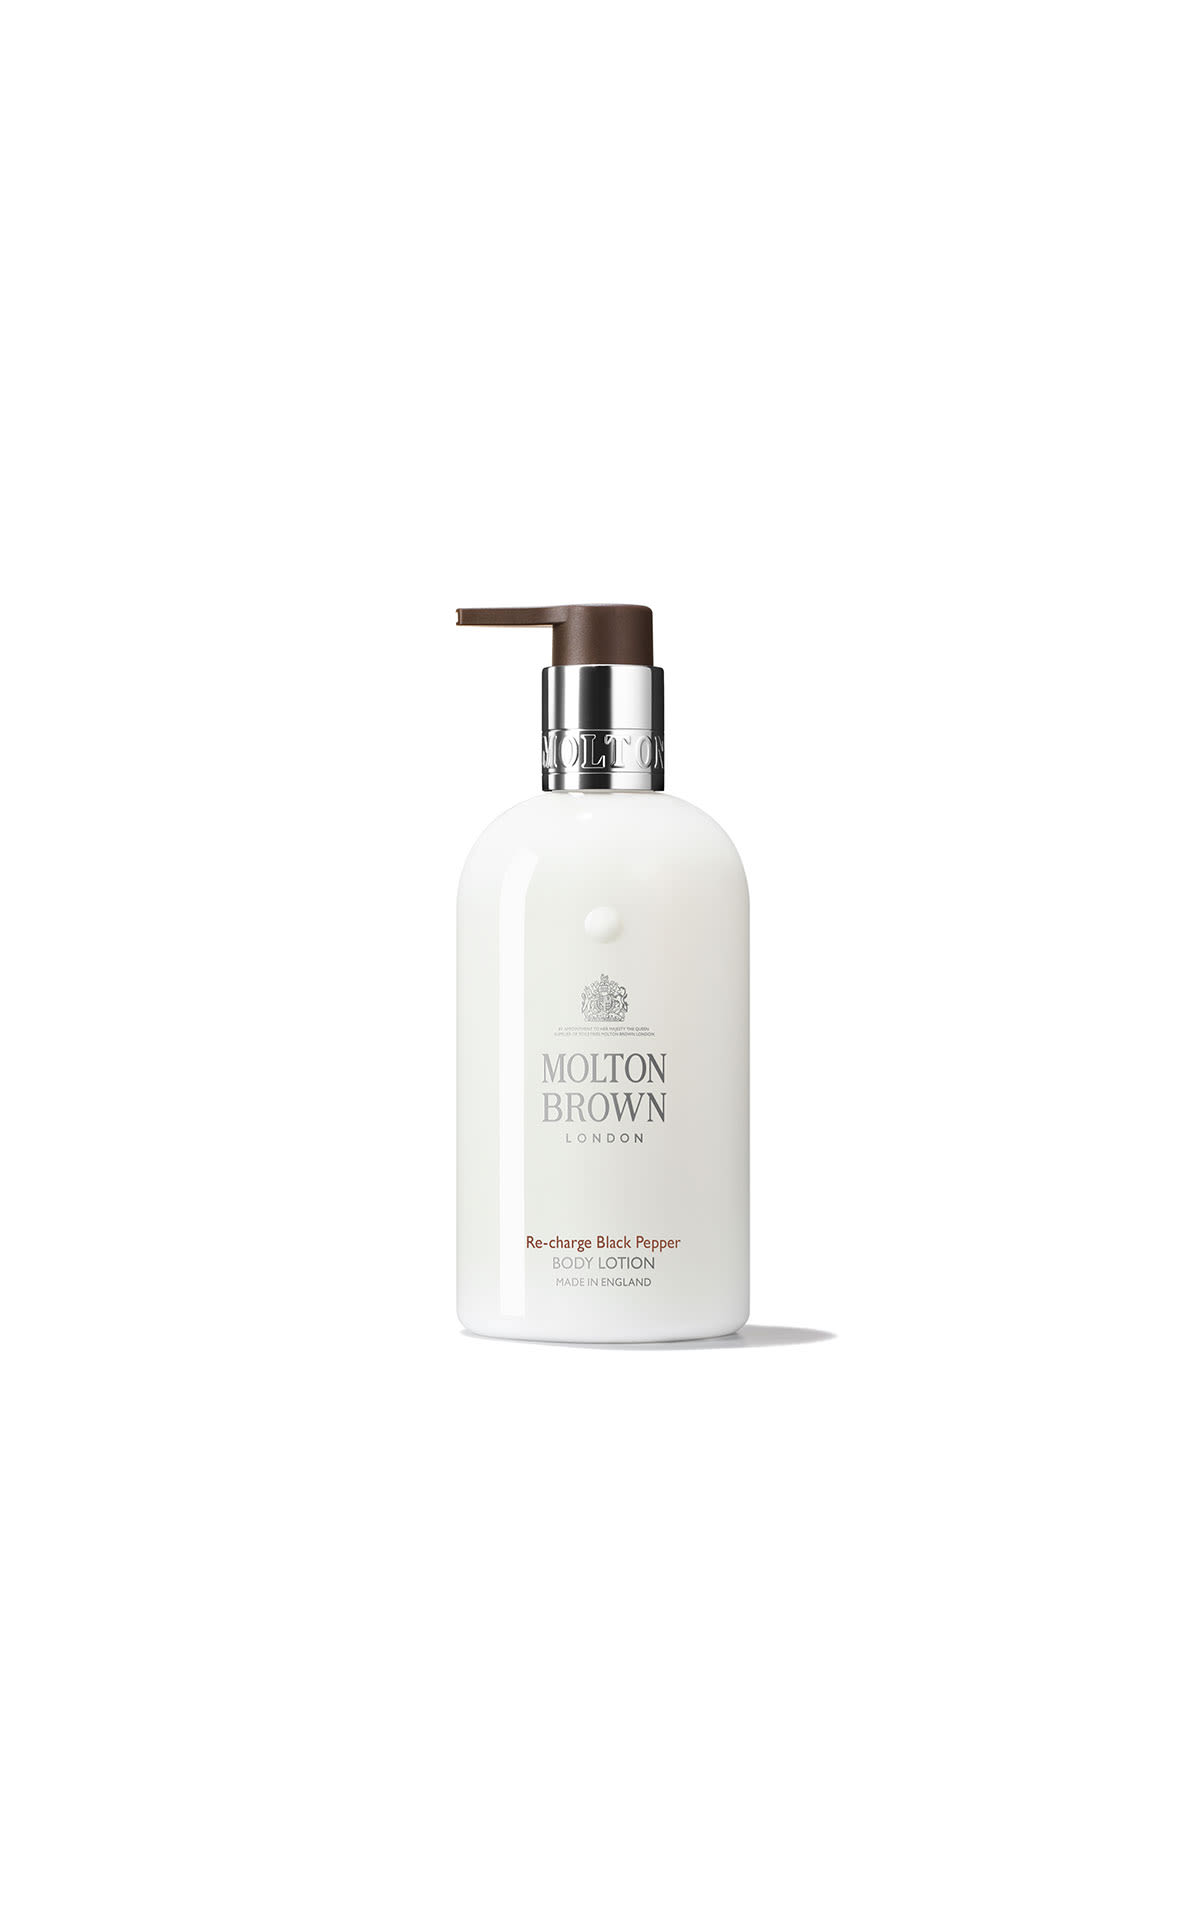 Molton Brown Black pepper body lotion from Bicester Village